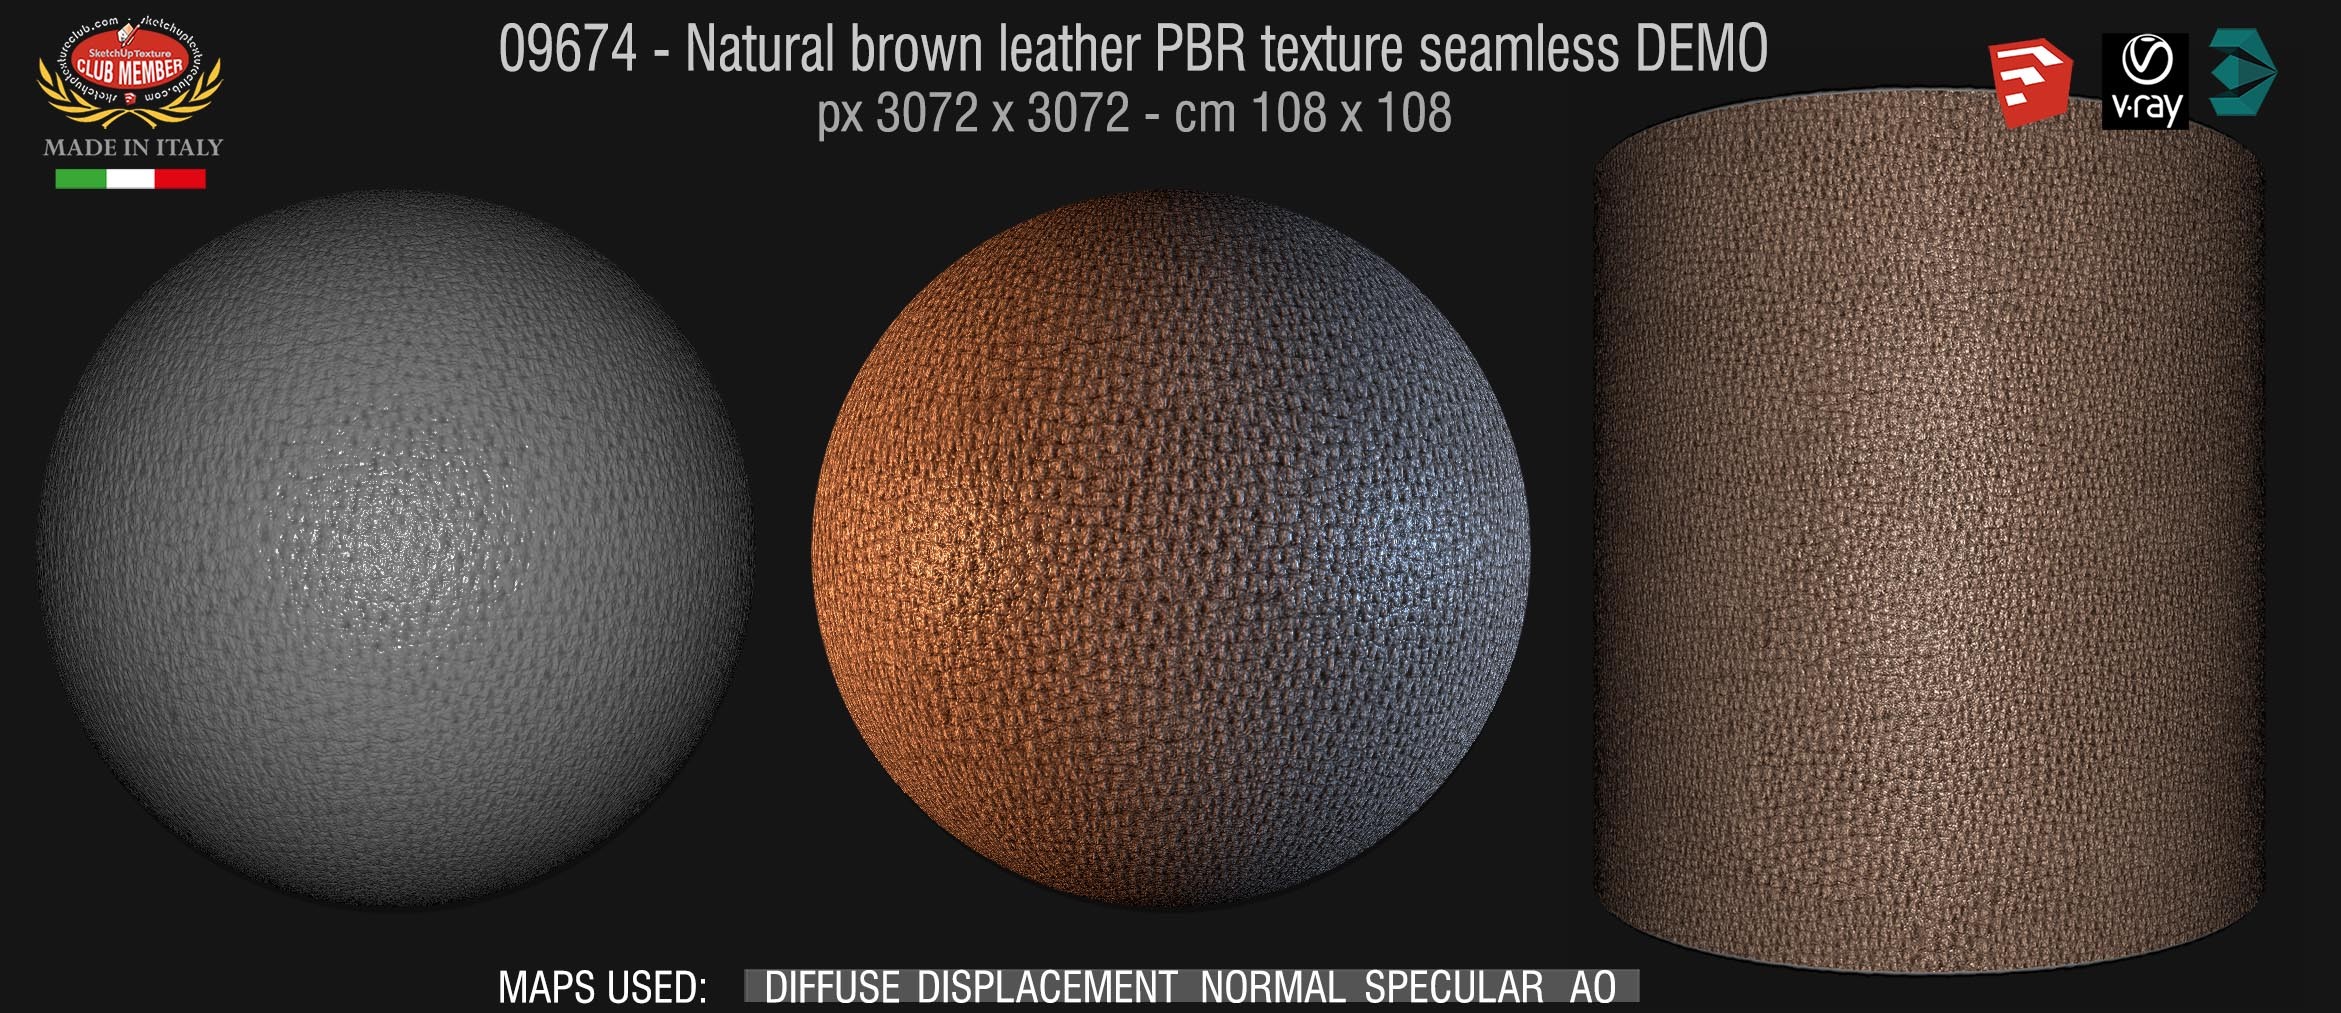 09674 Natural brown leather PBR texture seamless DEMO